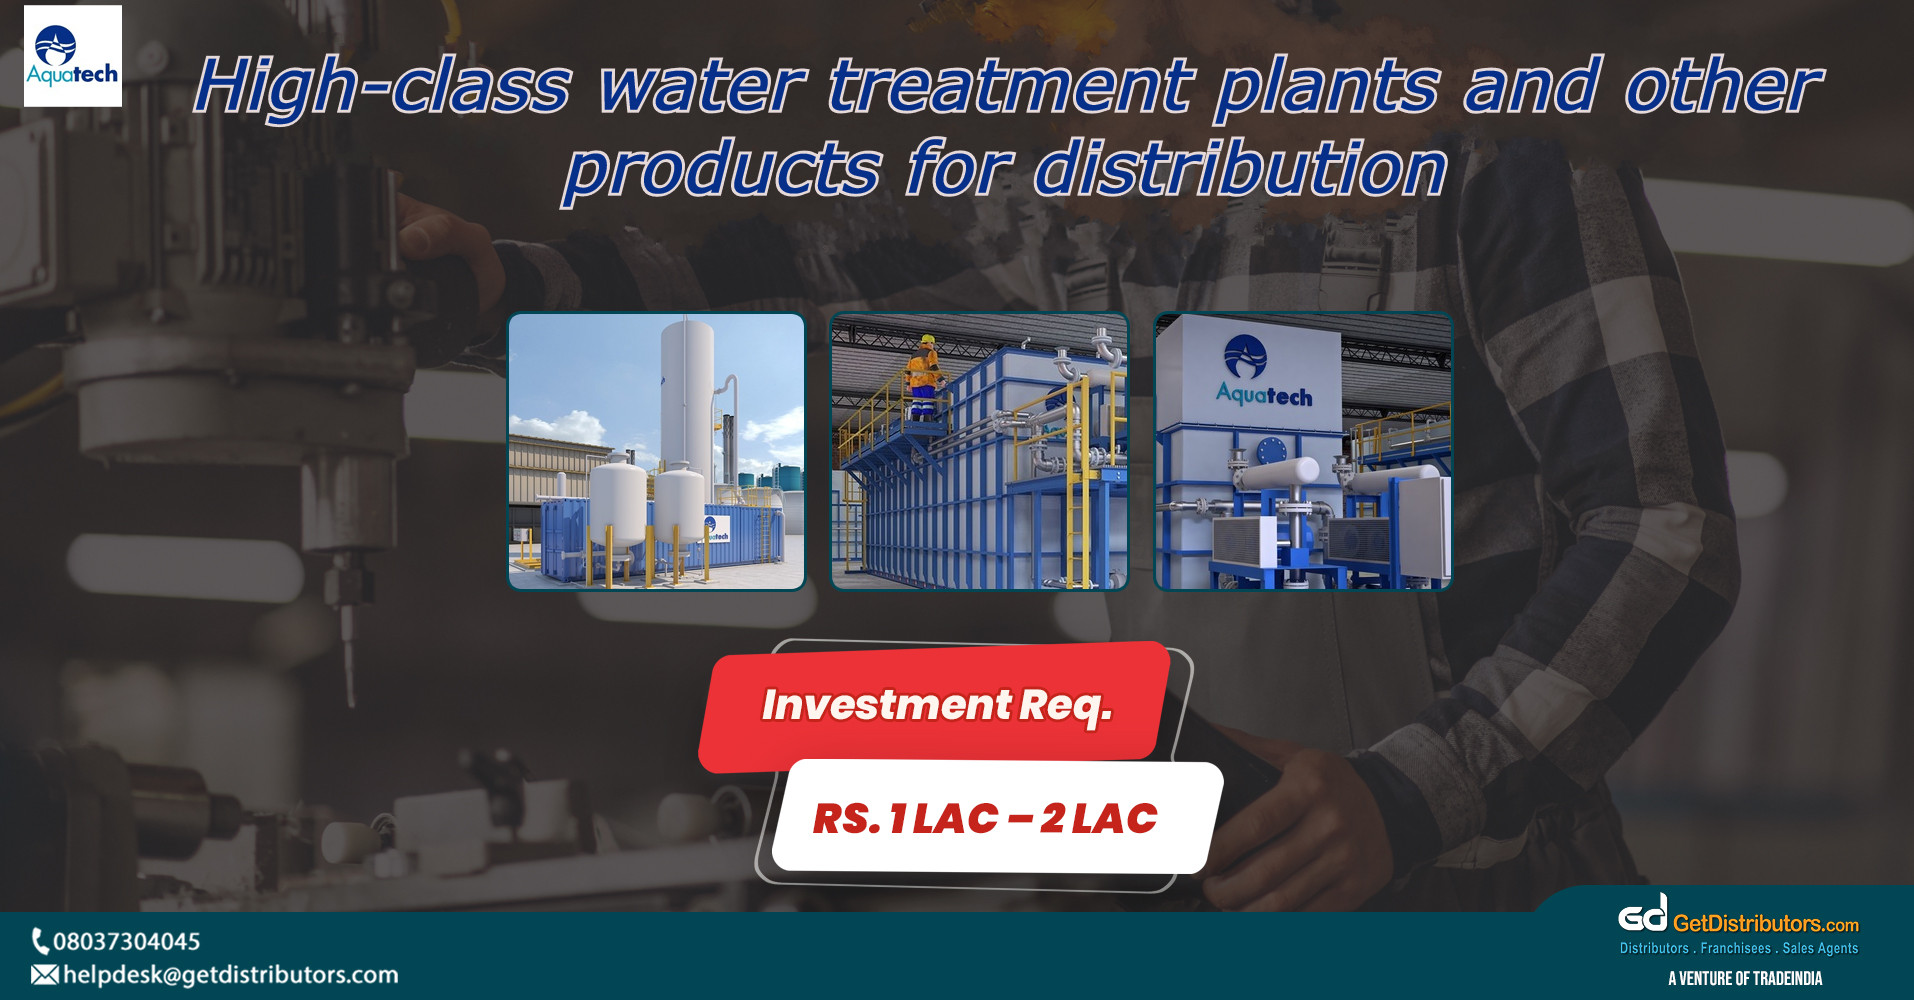 High-class water treatment plants and other products for distribution